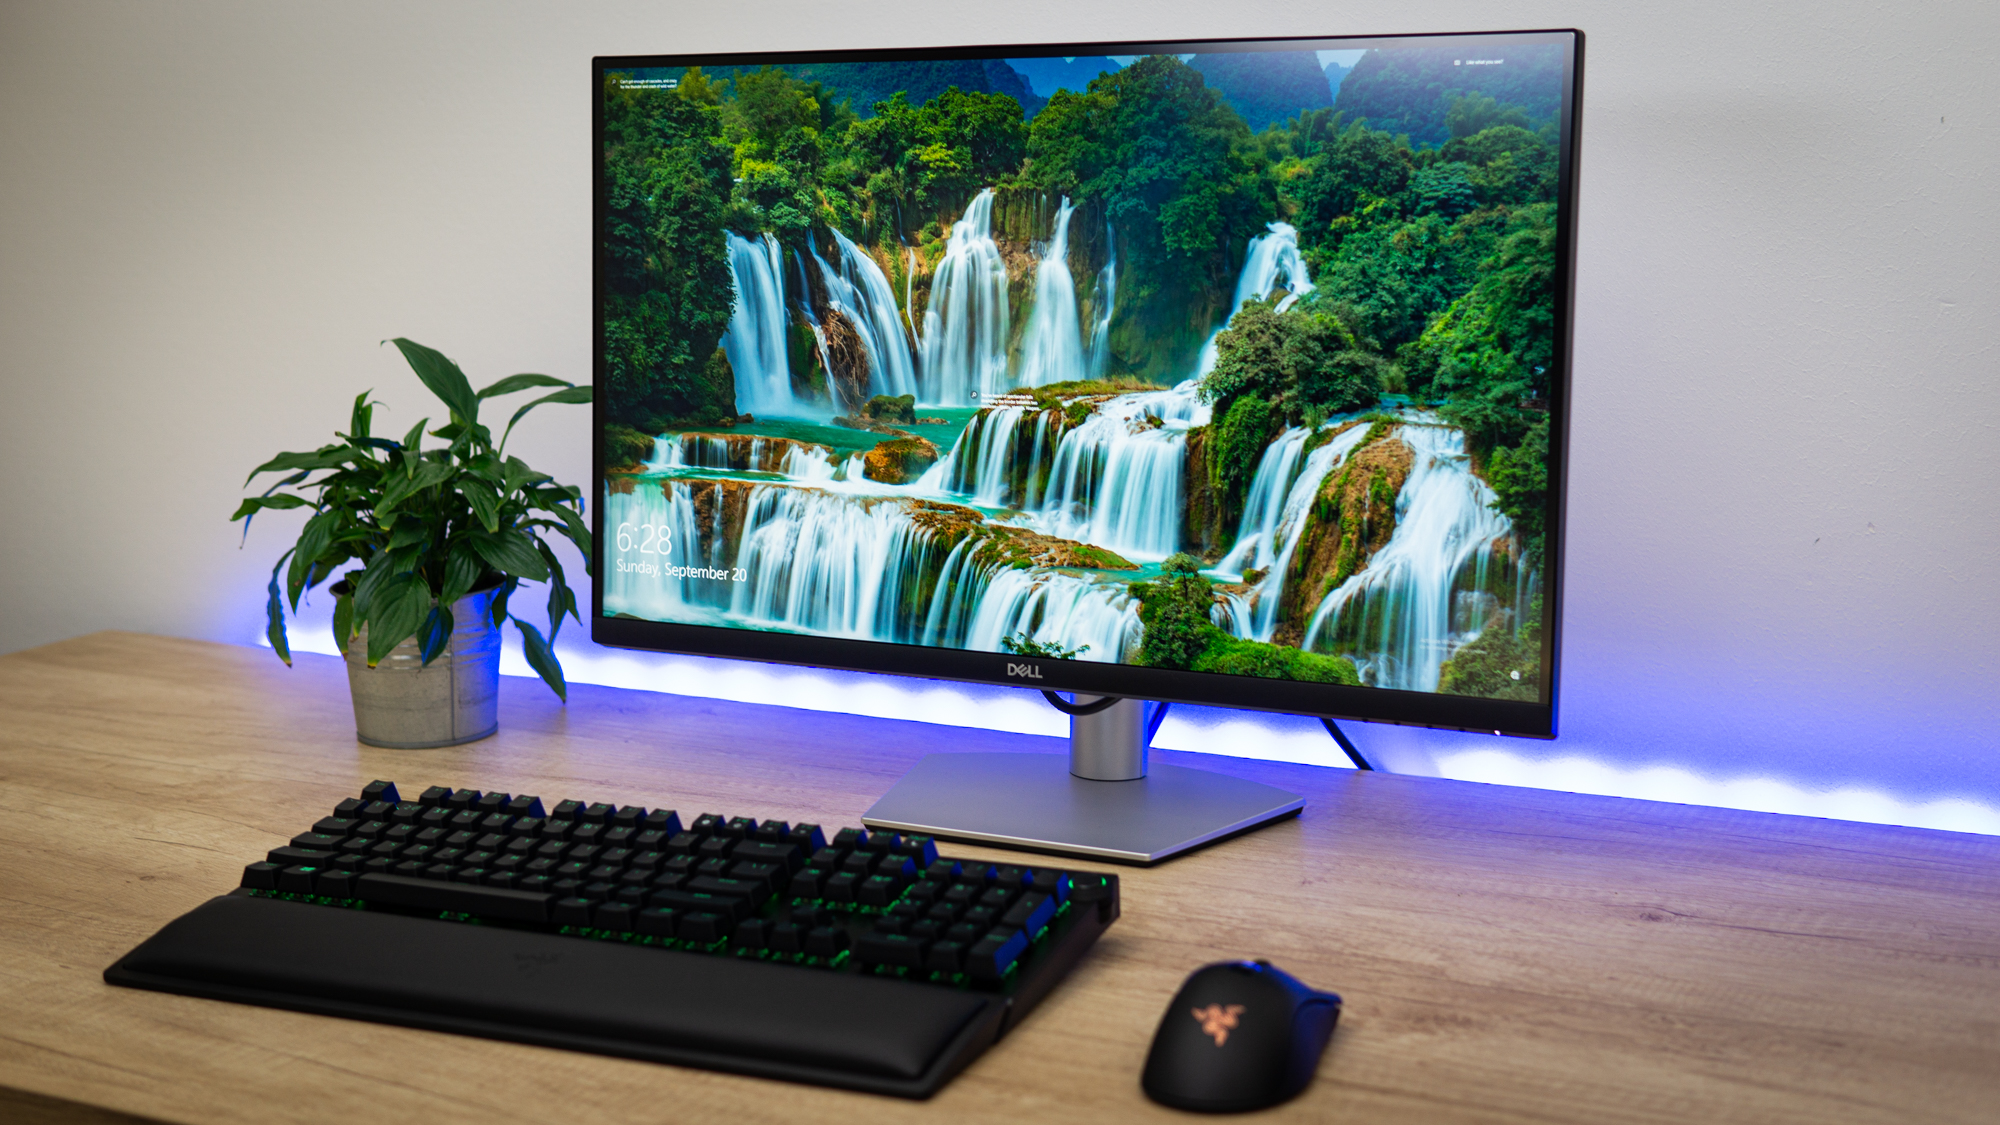 Dell S2721QS Review: 4K Basics At A Great Price | Digital Trends